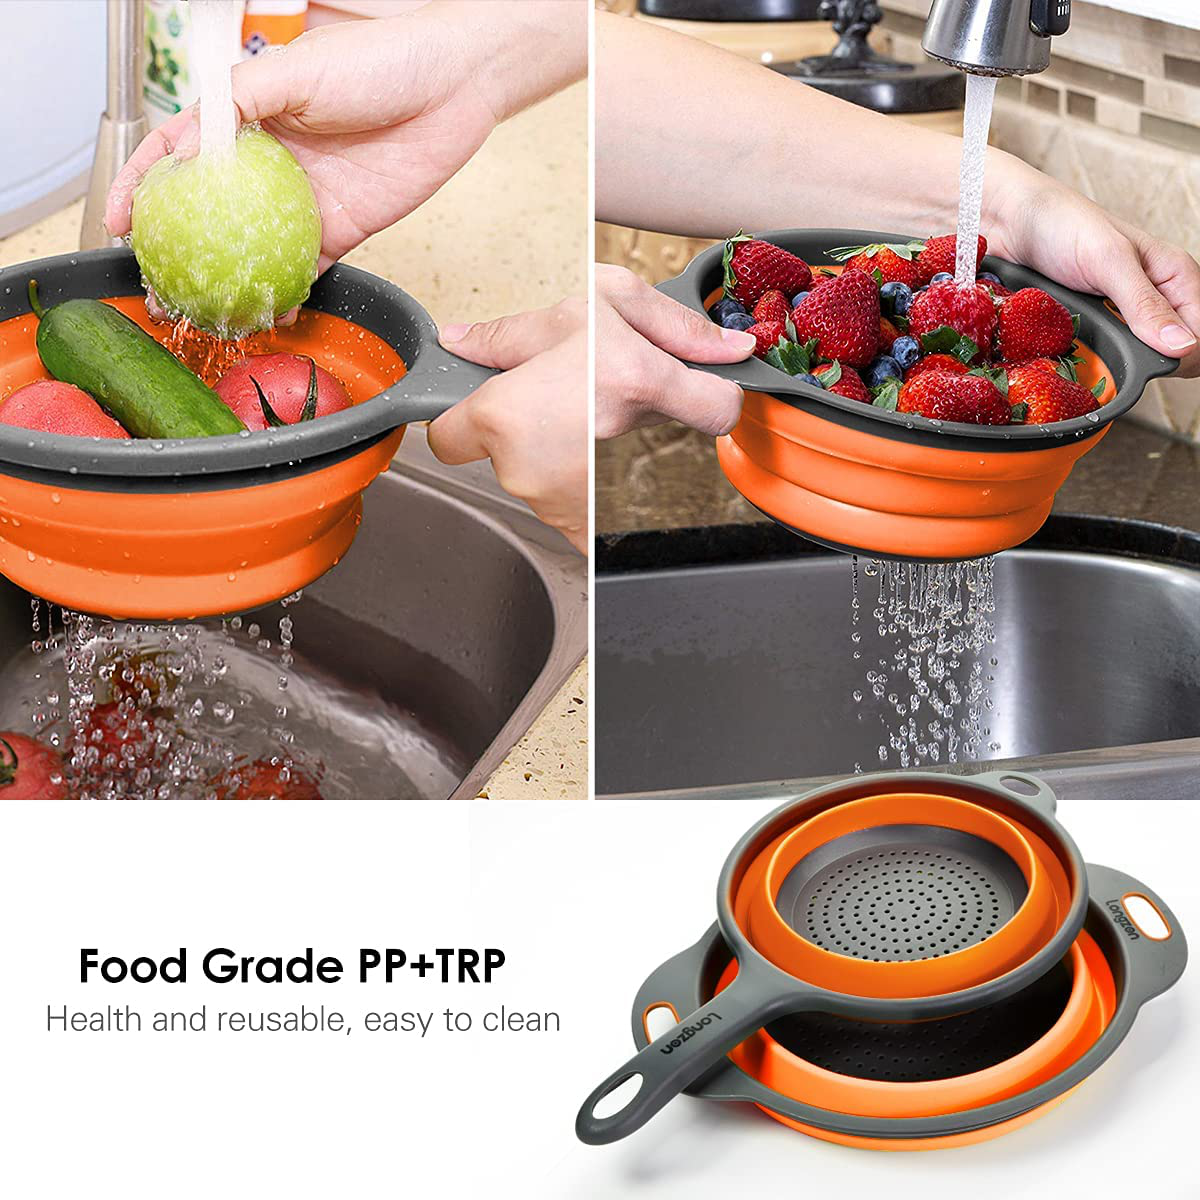 Longzon Collapsible Silicone Colanders and Strainers [2 Piece Set], Diameter Sizes 8'' -2 Quart and 9.5" -3 Quart, Pasta Vegetable/Fruit Kitchen Mesh Strainers with Extendable Handles Orange and Grey